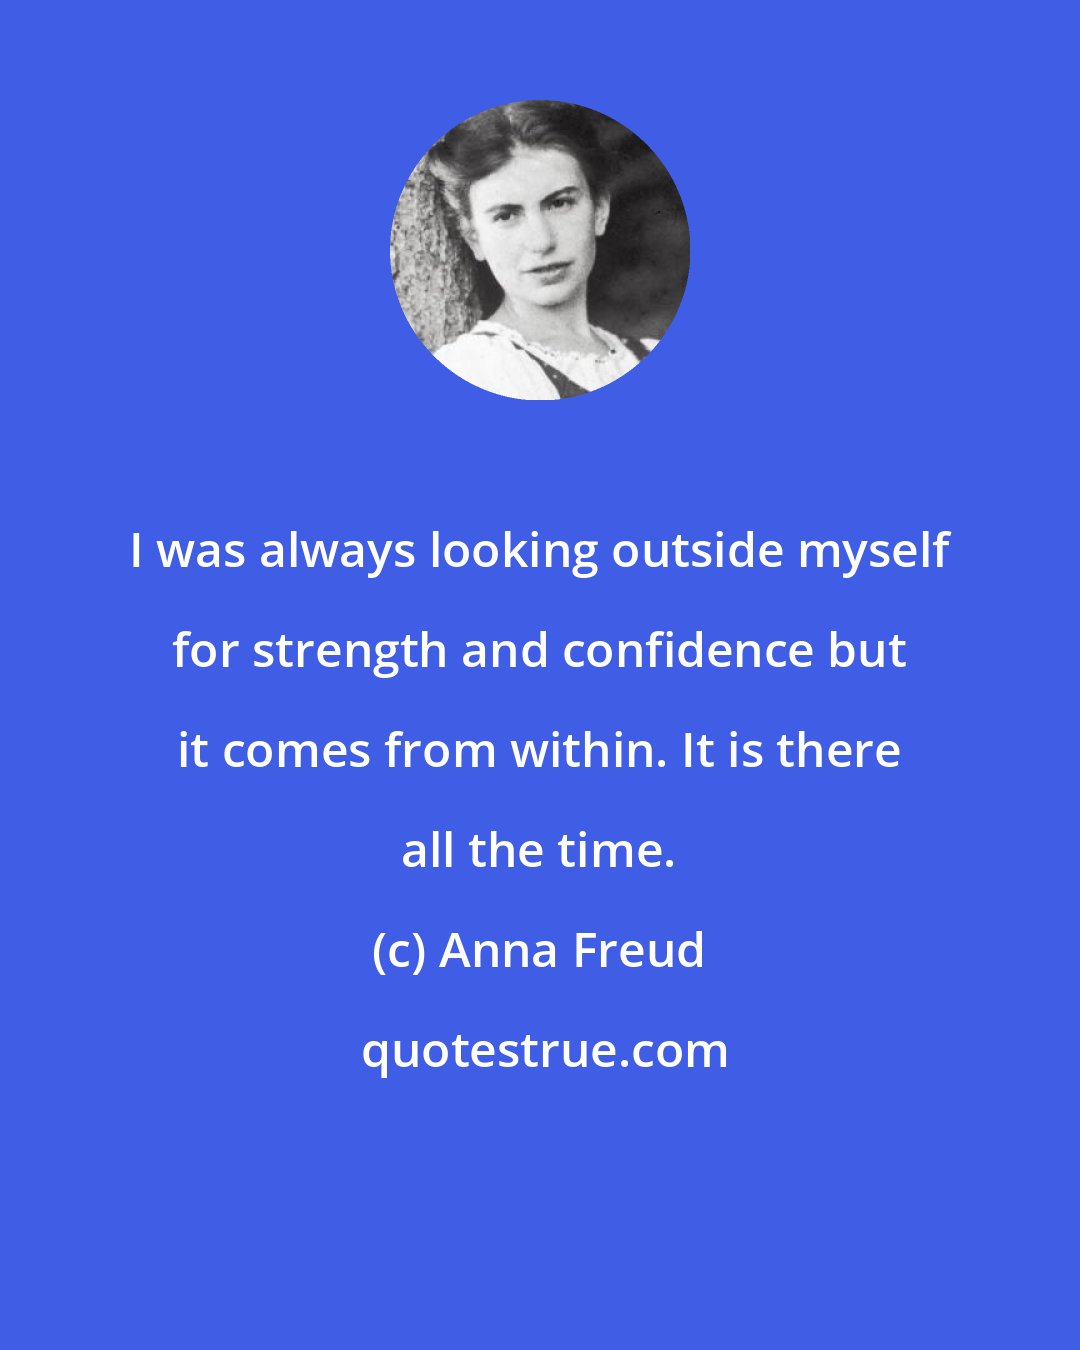 Anna Freud: I was always looking outside myself for strength and confidence but it comes from within. It is there all the time.